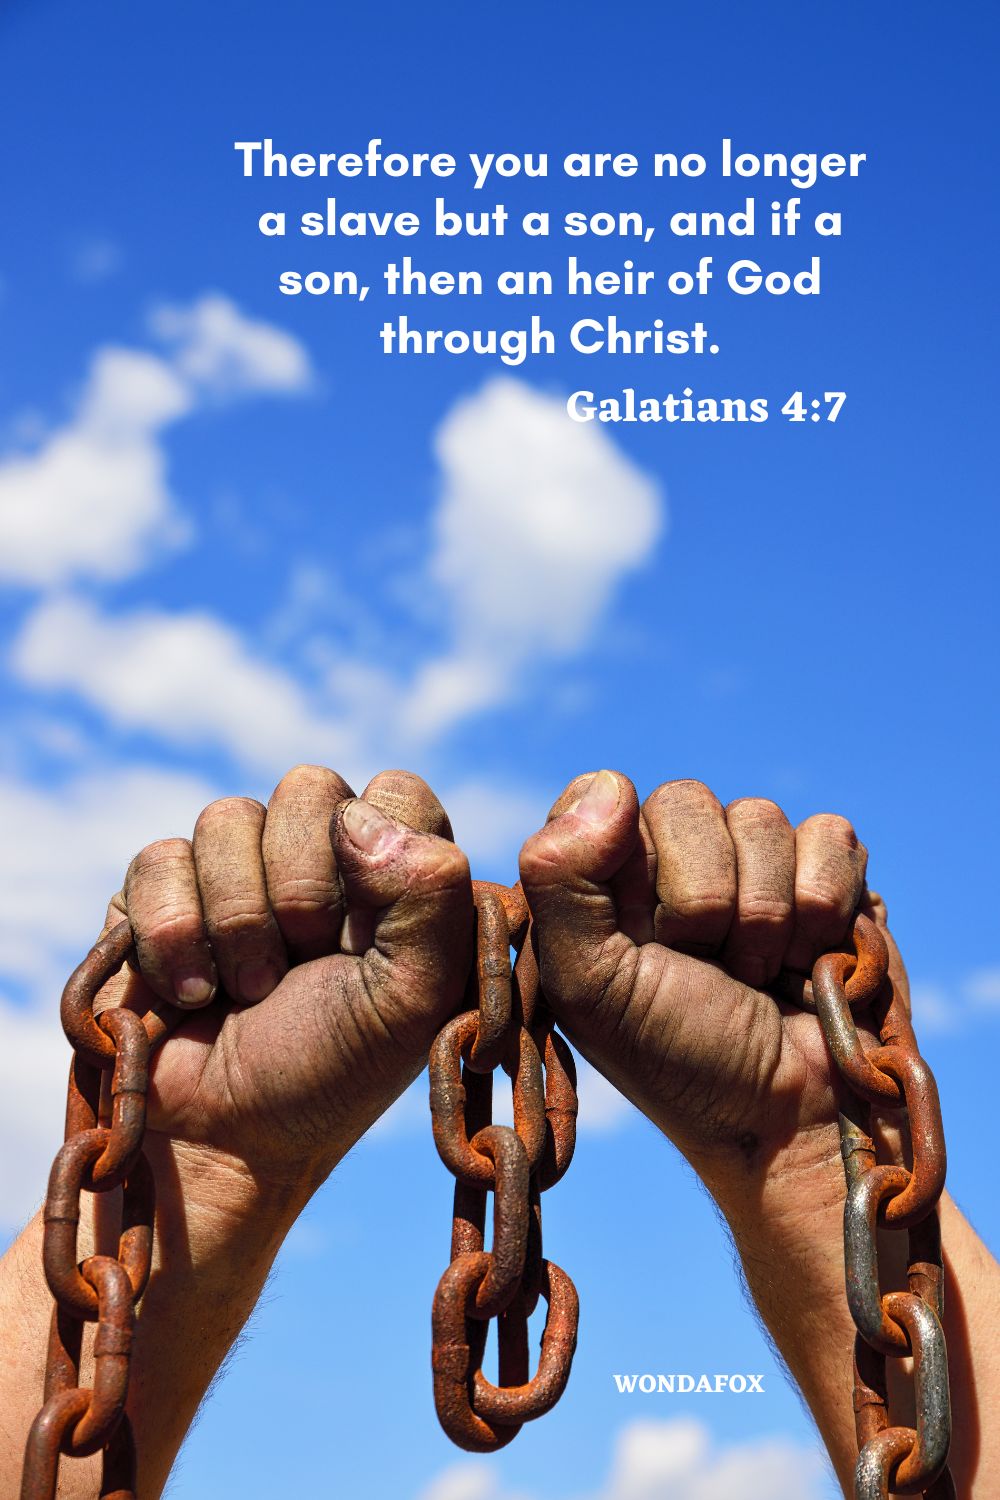 Therefore you are no longer a slave but a son, and if a son, then an heir of God through Christ.
Galatians 4:7